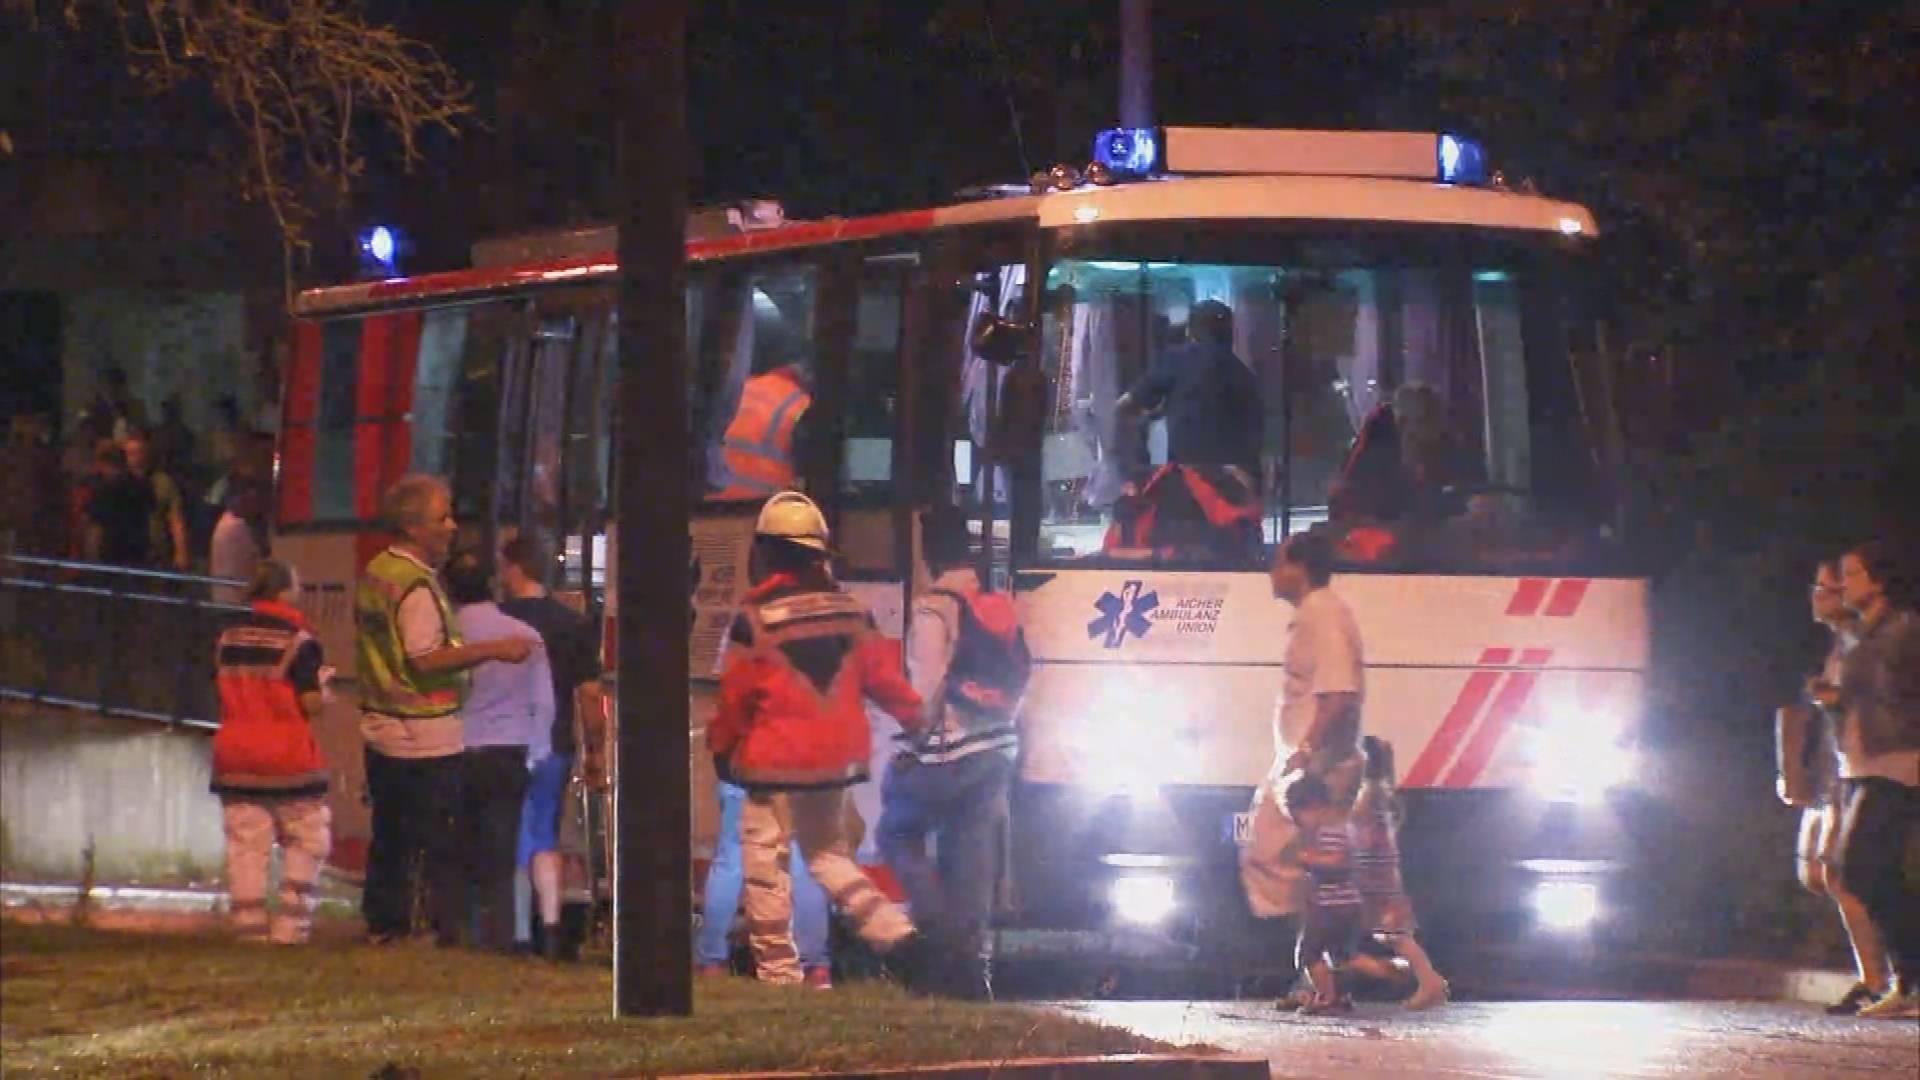 Screen grab shows people being evacuated onto bus following shooting rampage at shopping mall in Munich